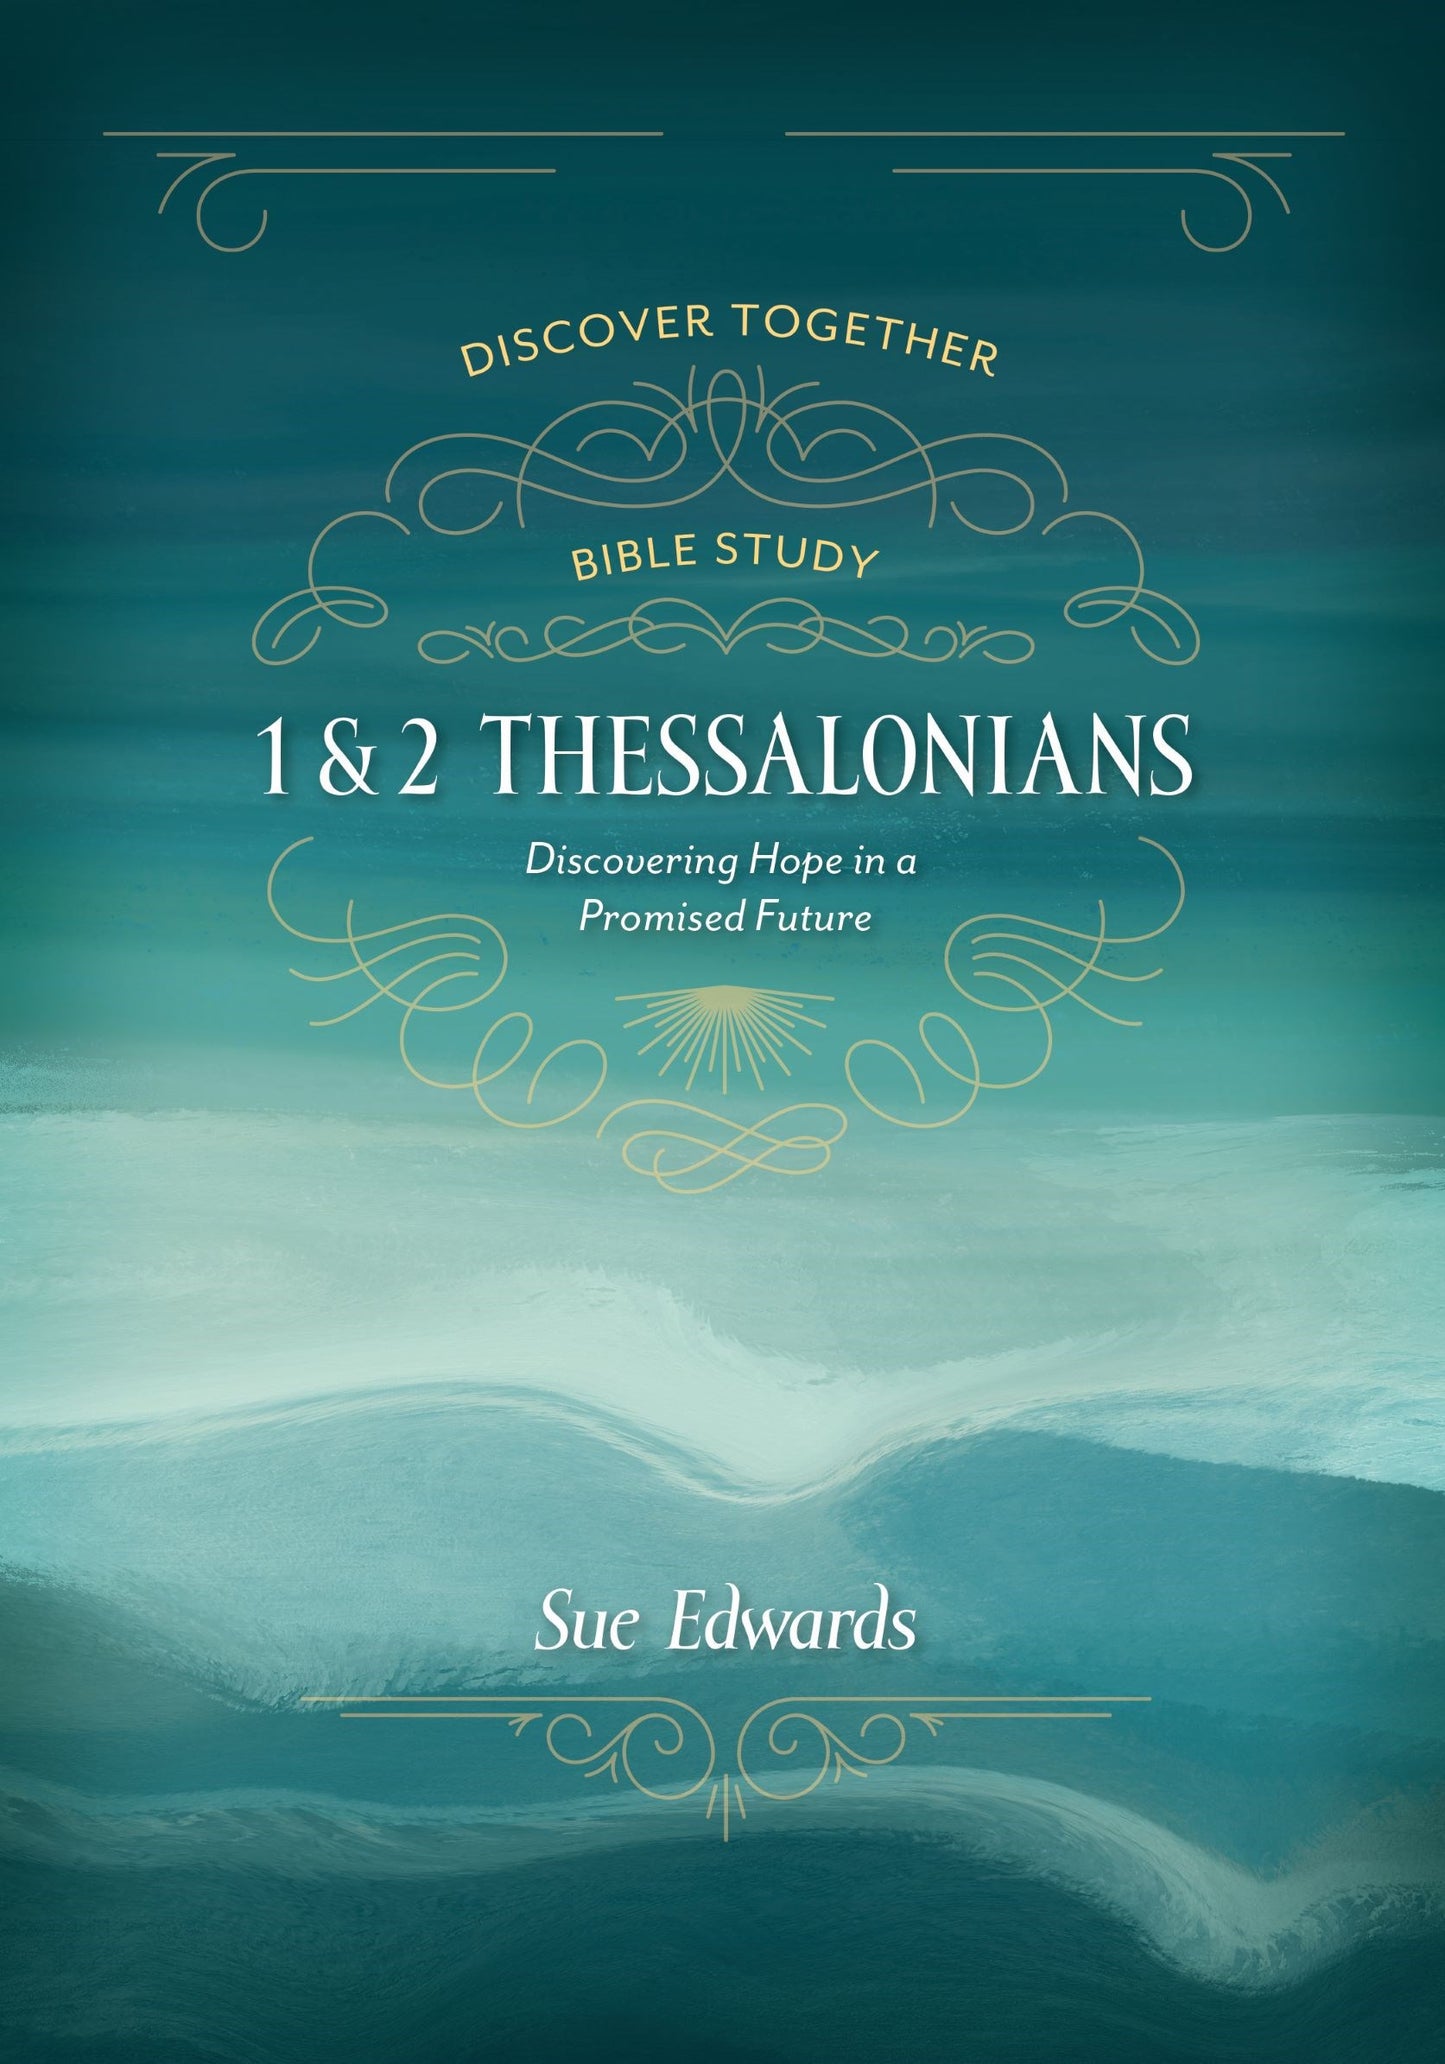 1 & 2 Thessalonians (Discover Together Bible Study)